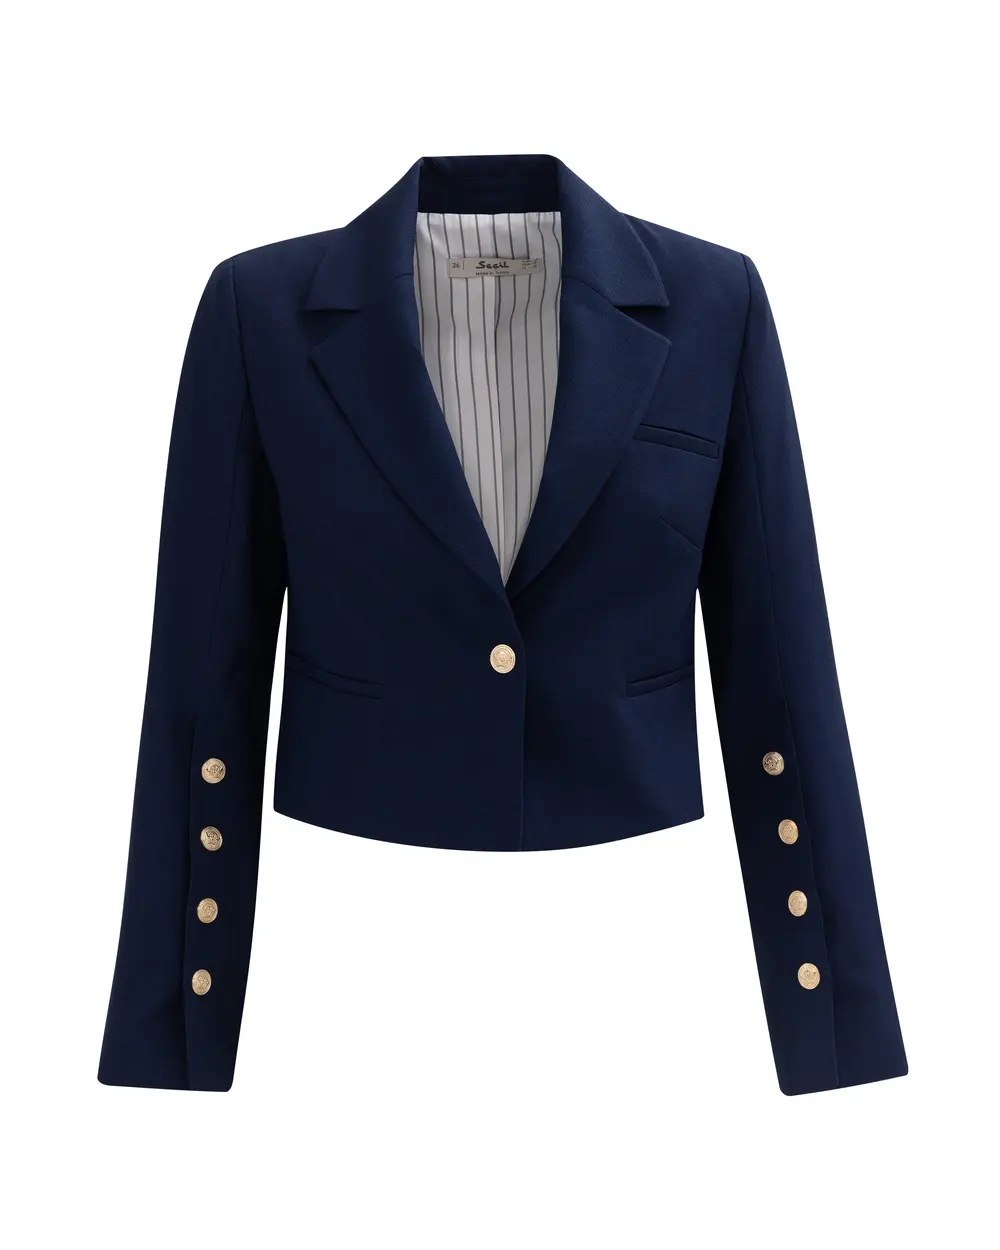 Waist Length Jacket with Button Detail